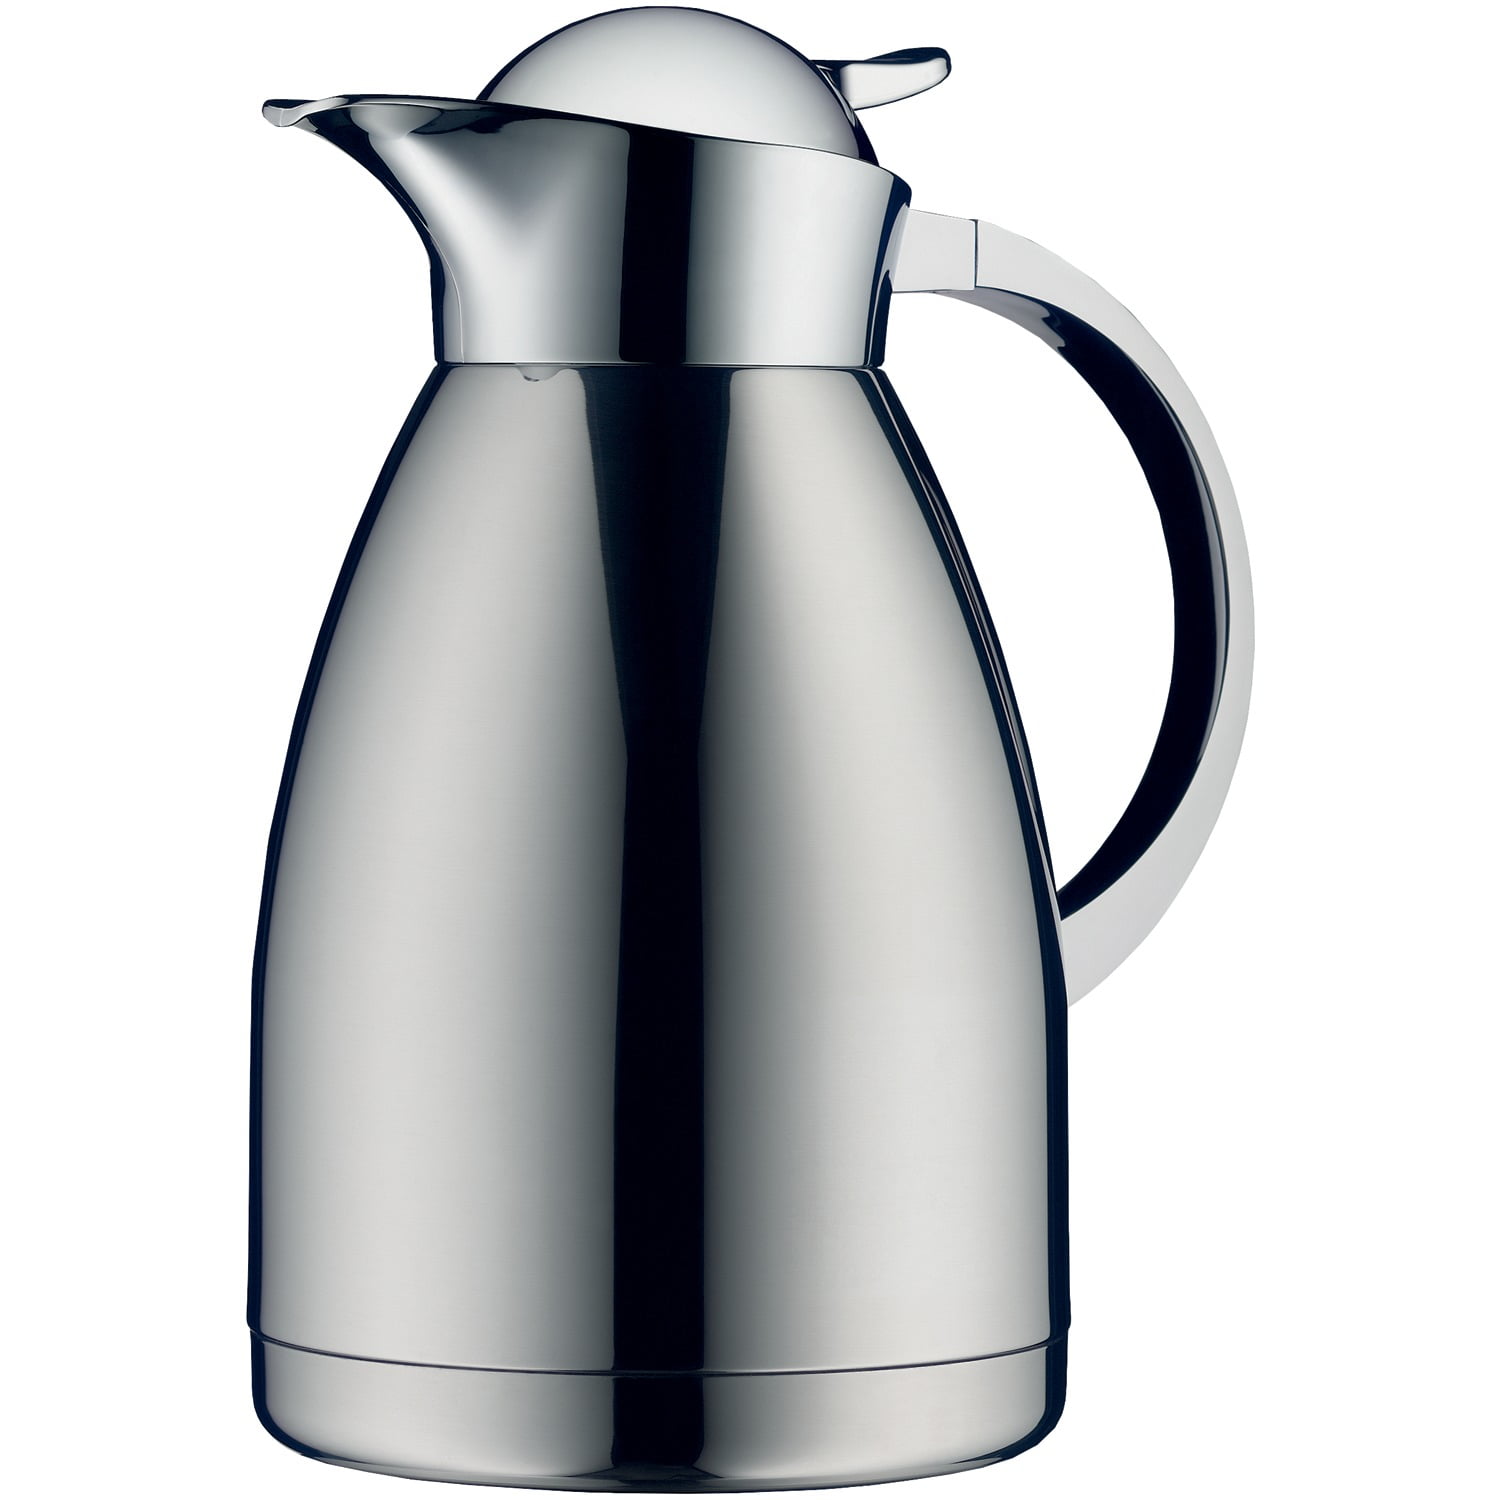 ALFI Insulated jug Powder Green 1 Litre Stainless Steel